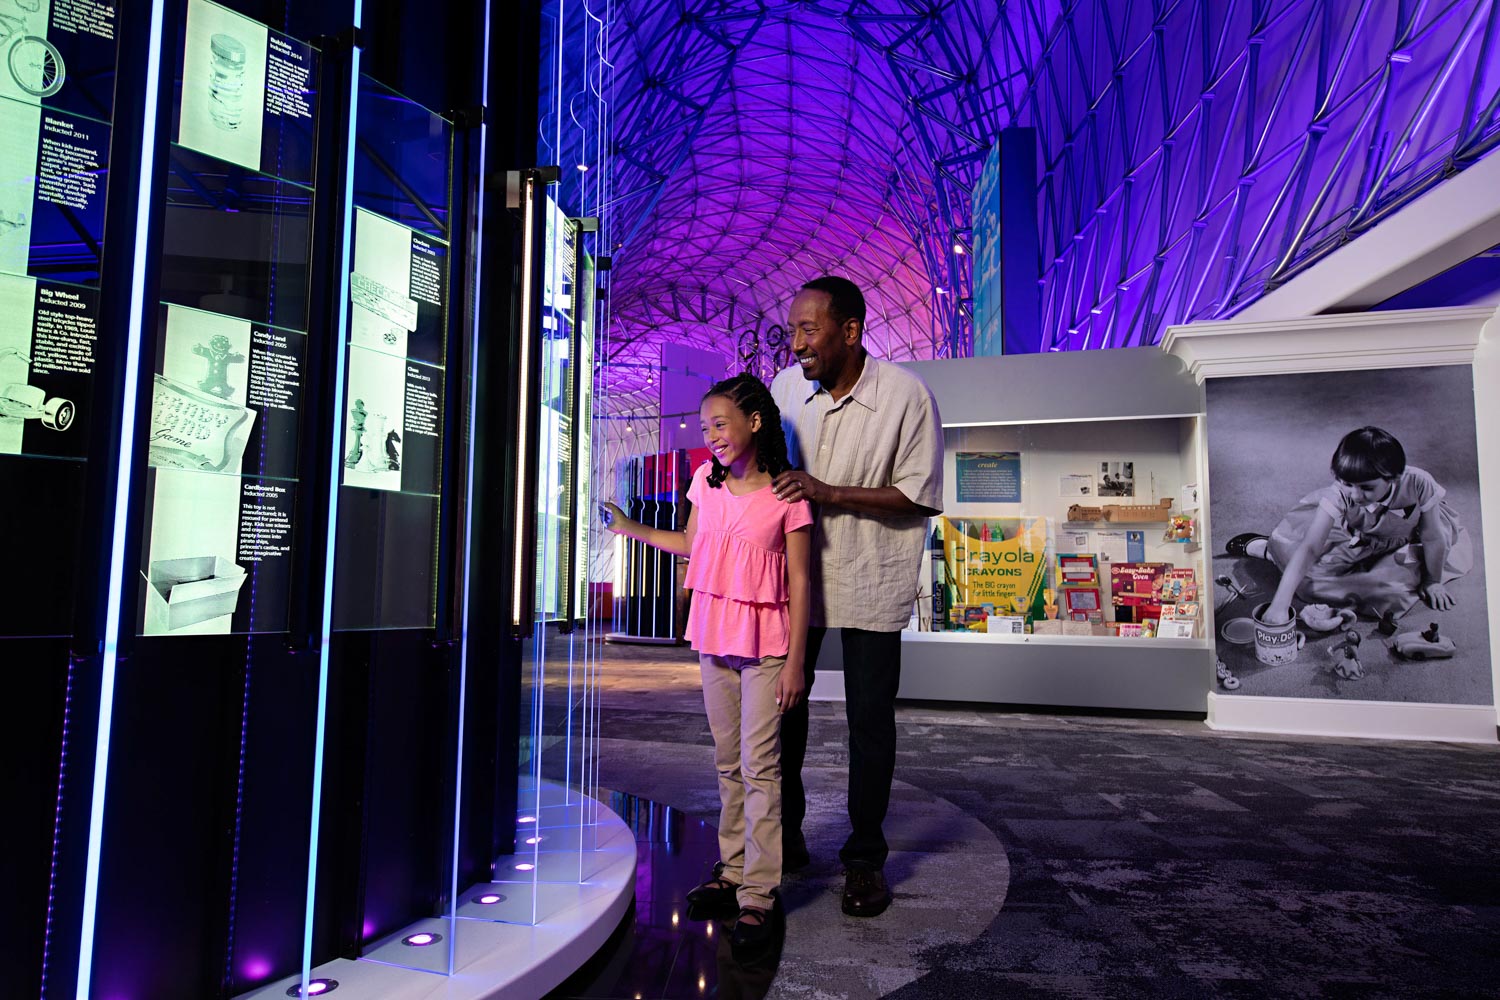 A female kid and a man at the Strong National Museum of Play in Rochester, New York